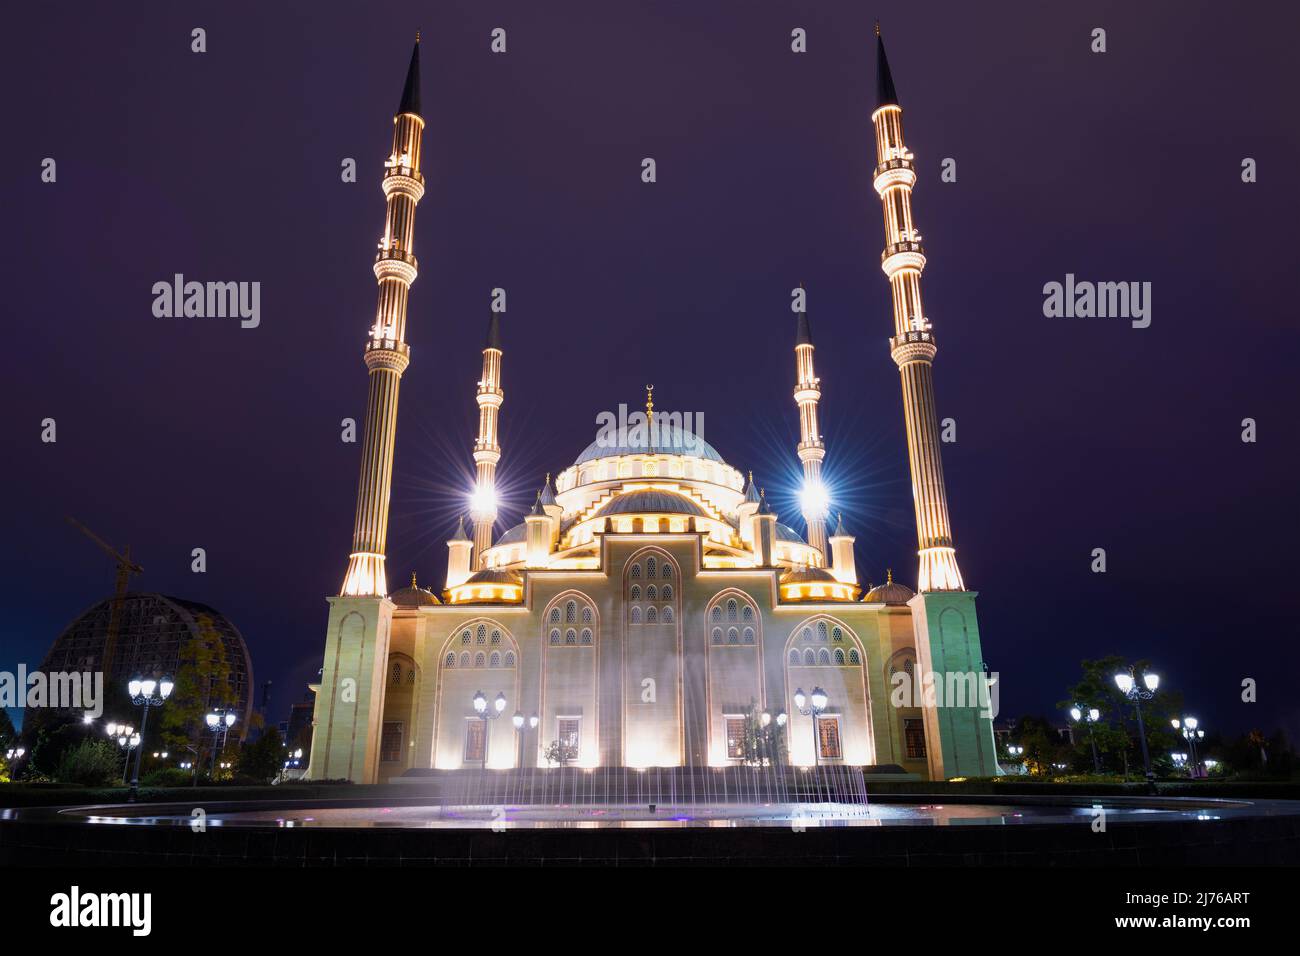 GROZNY, RUSSIA - SEPTEMBER 29, 2021: Fountain and mosque 'Heart of Chechnya' close-up on the late evening Stock Photo